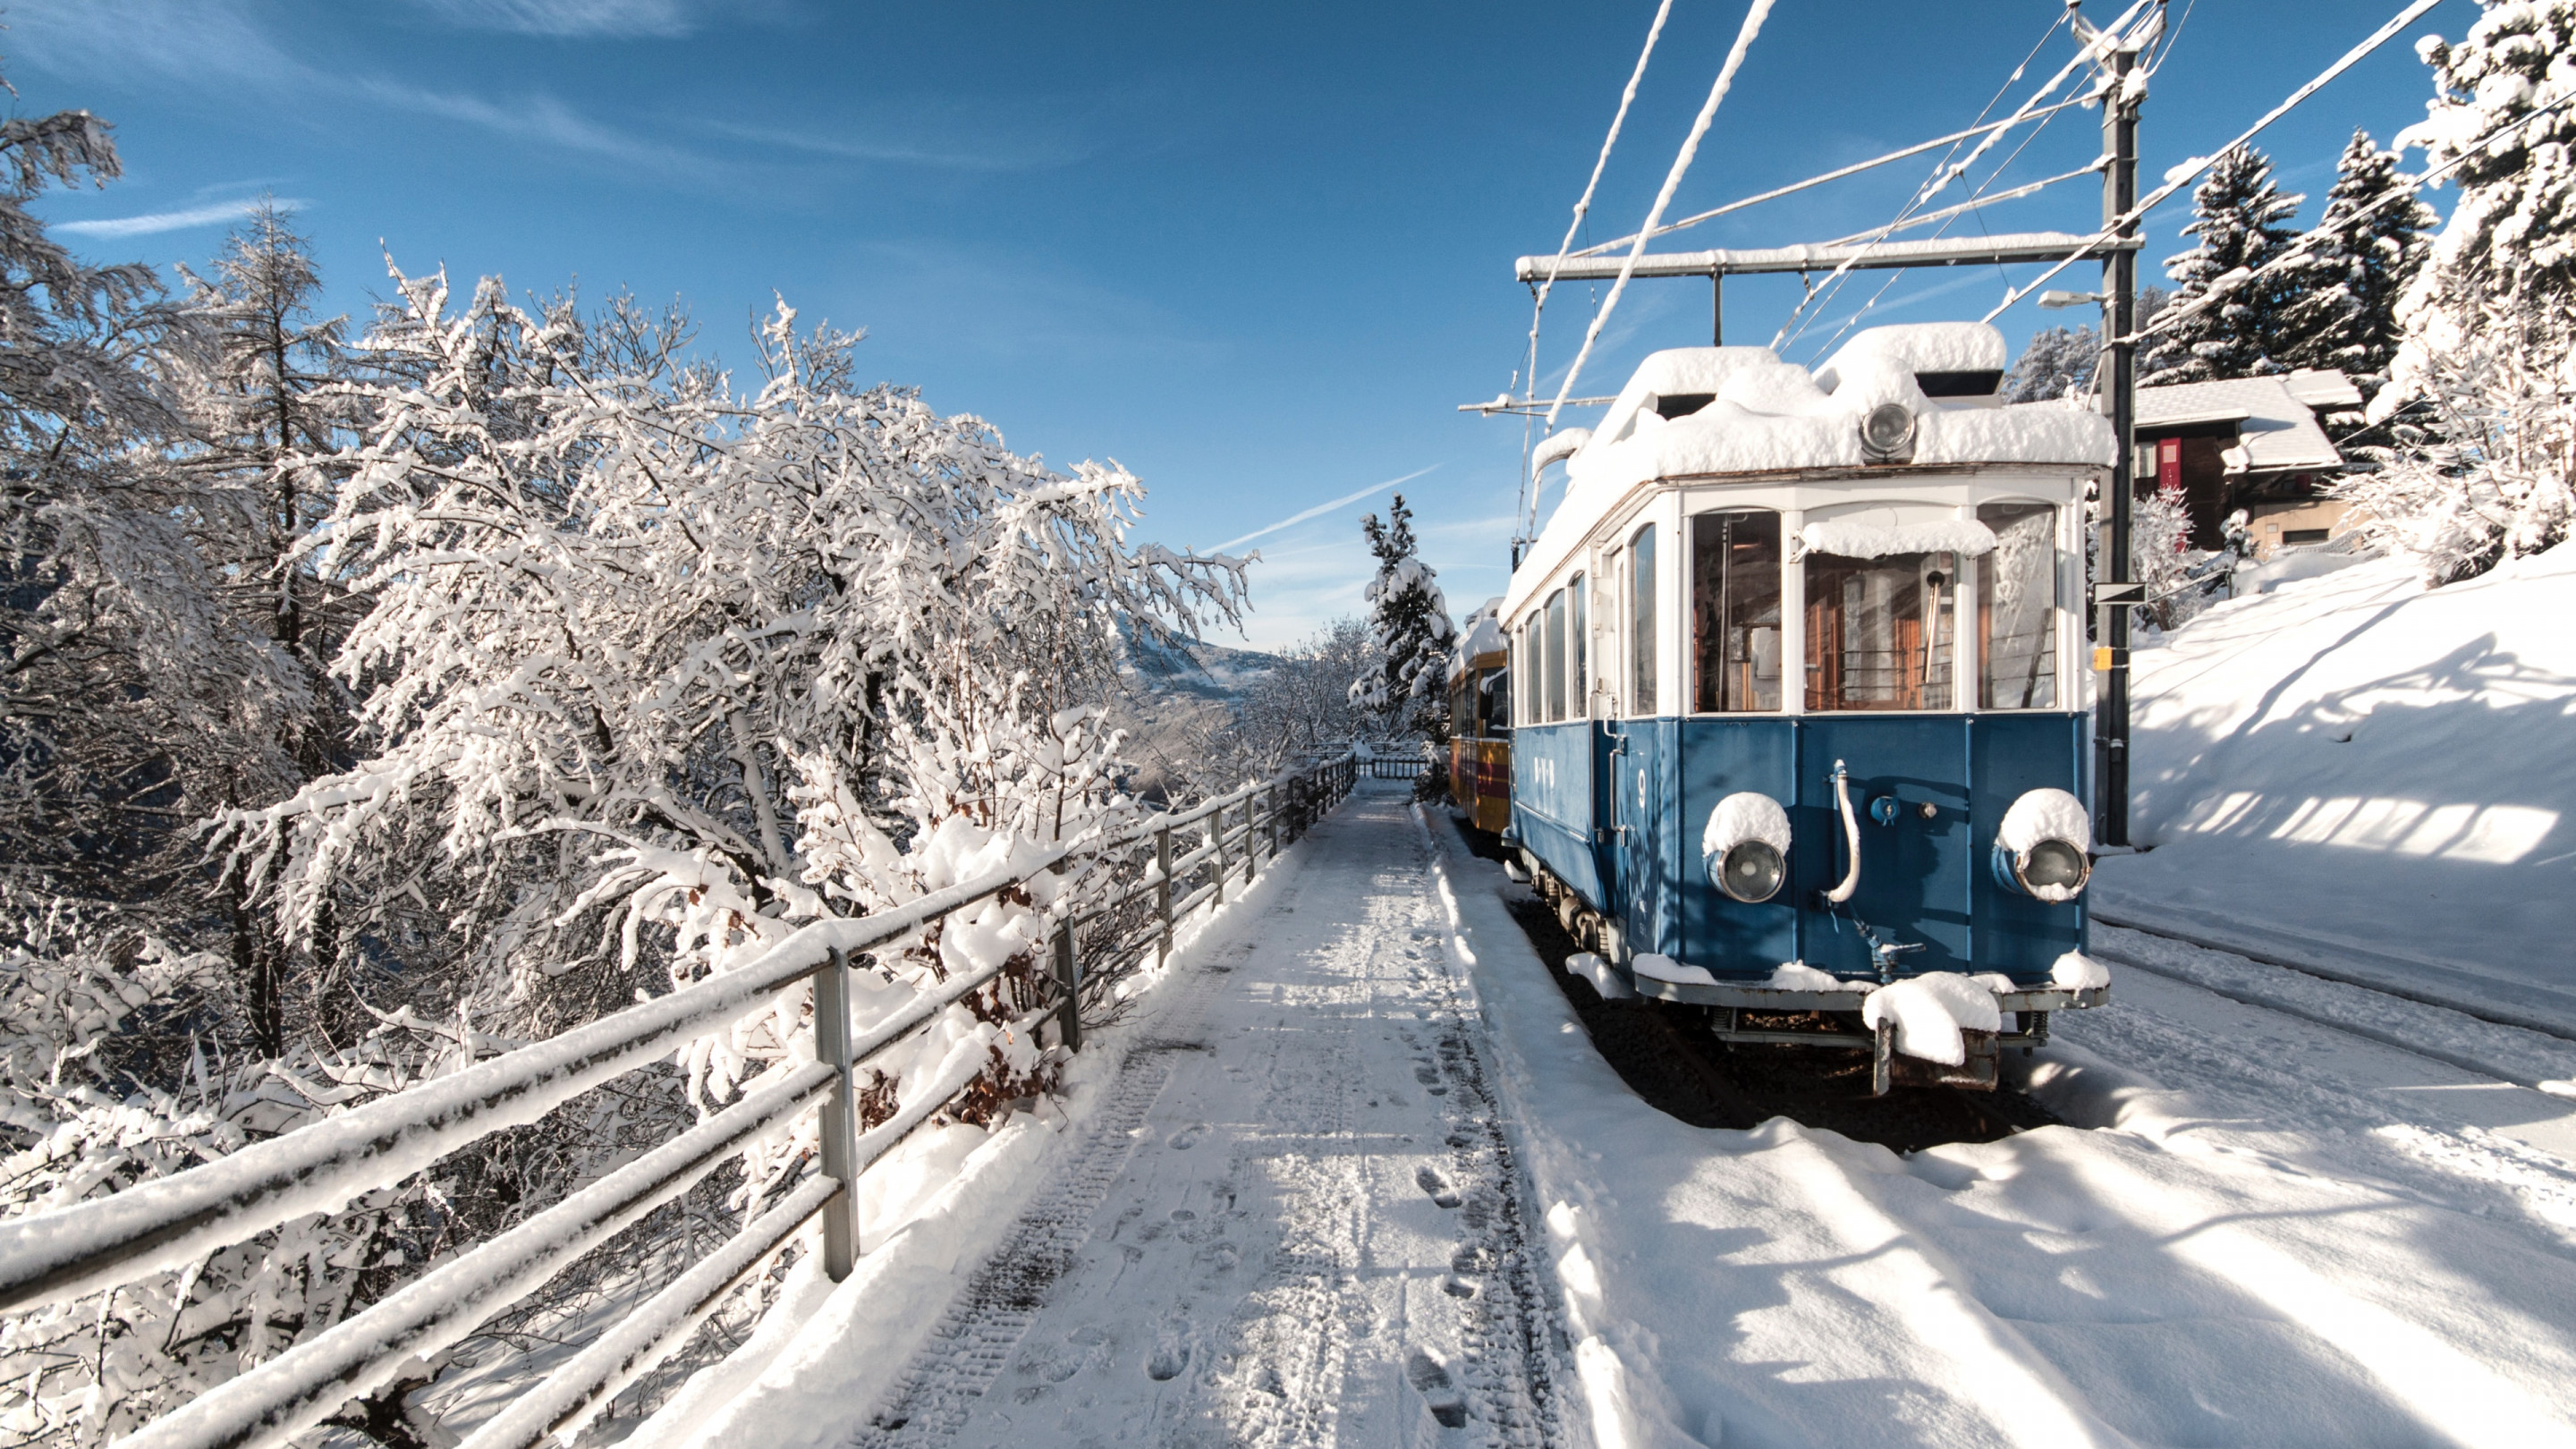 Old train covered with snow wallpaper 2880x1620